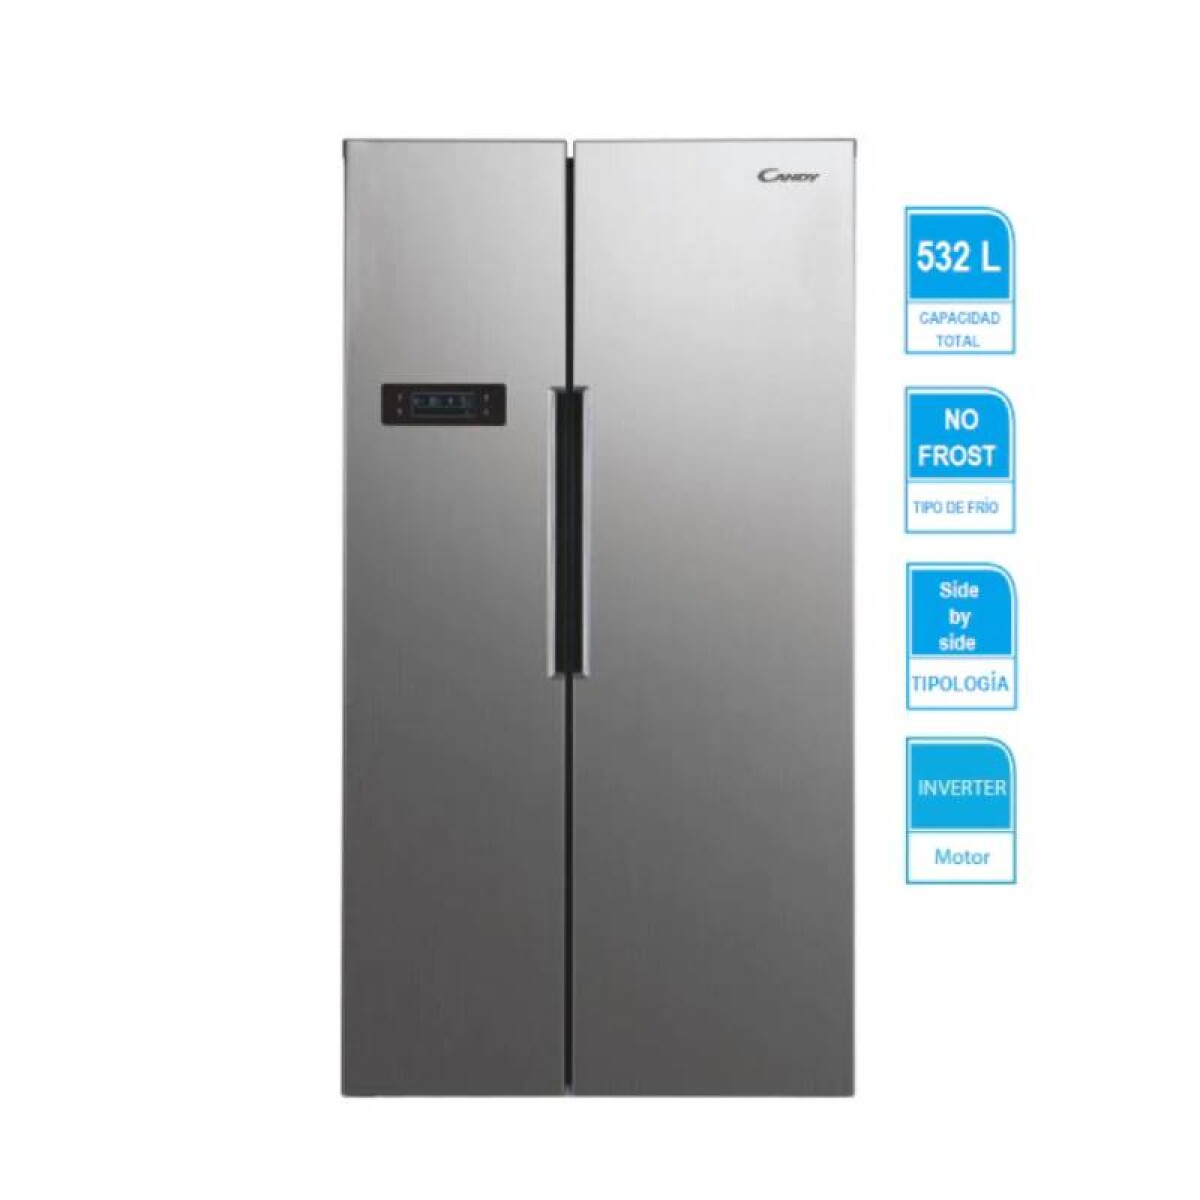 Heladera Side By Side Candy 532 L Frio Seco - Gris Inox 